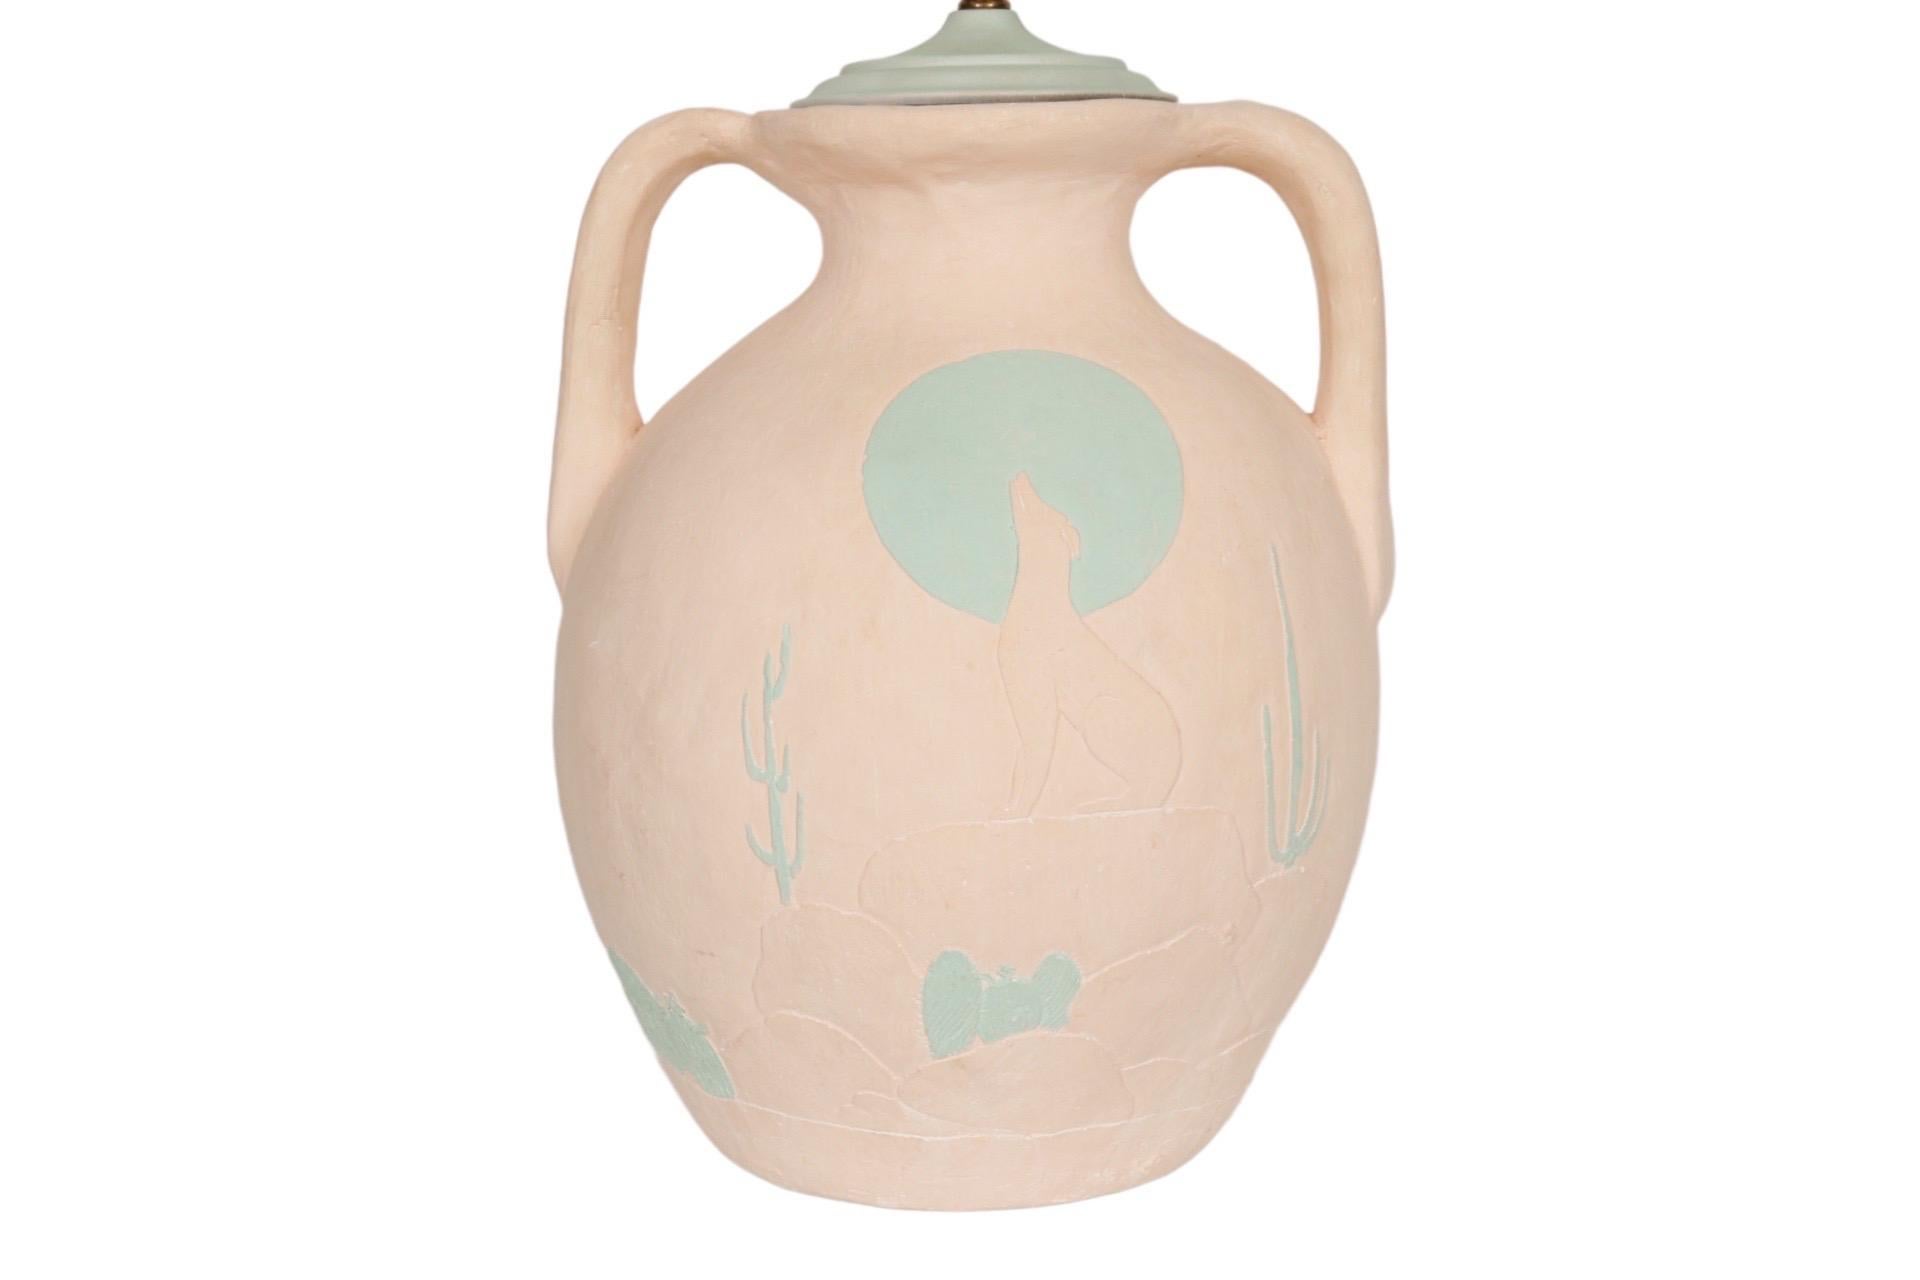 A southwestern earthenware amphora table lamp. Hand crafted, with a pink finish and decorated on both sides with an embossed and engraved desert scene. A coyote howls in front of a sea green moon, surrounded by pink sand dunes and green cacti. The